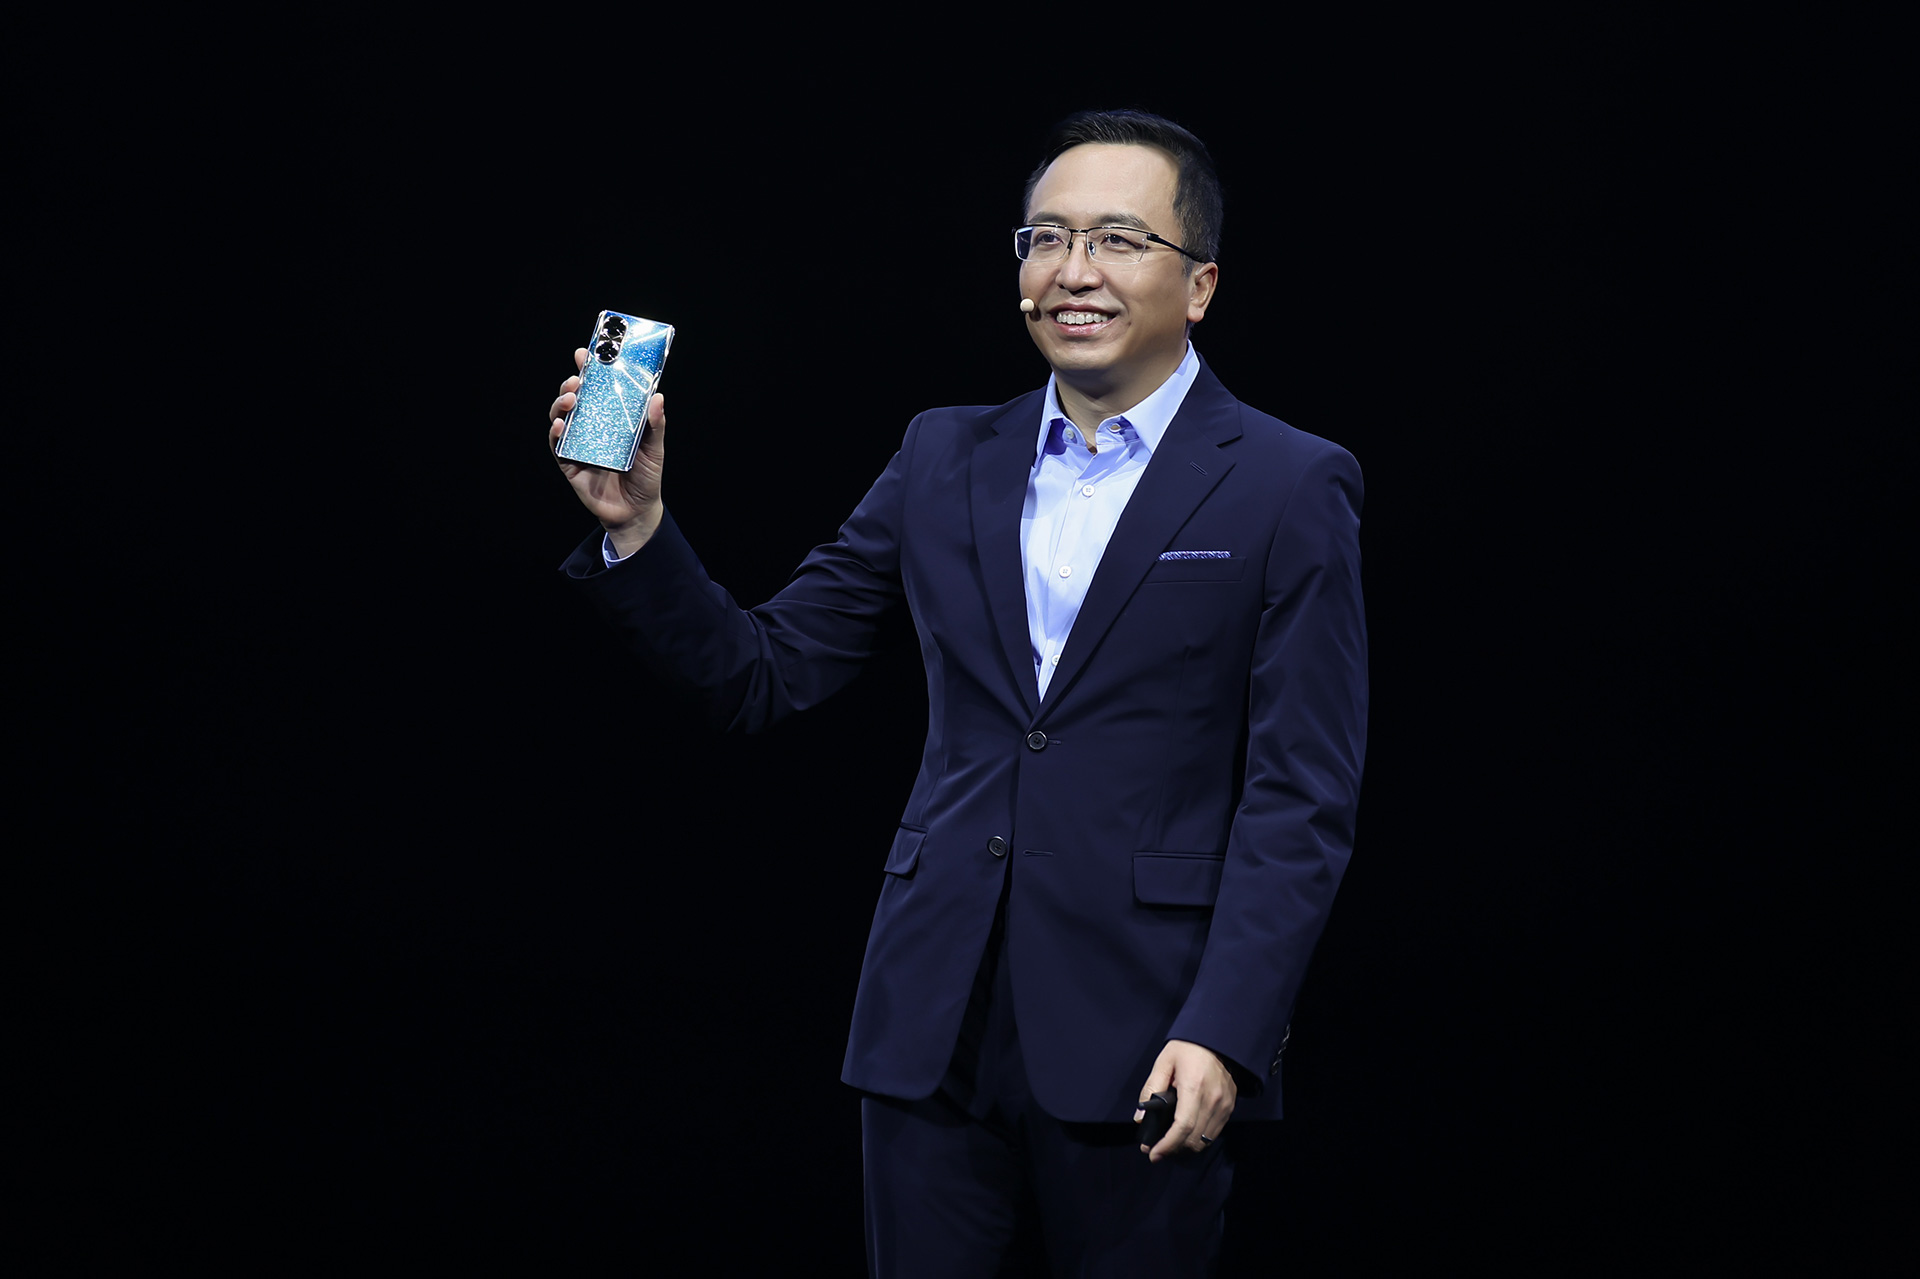 HONOR Launches the HONOR 60 Series in China